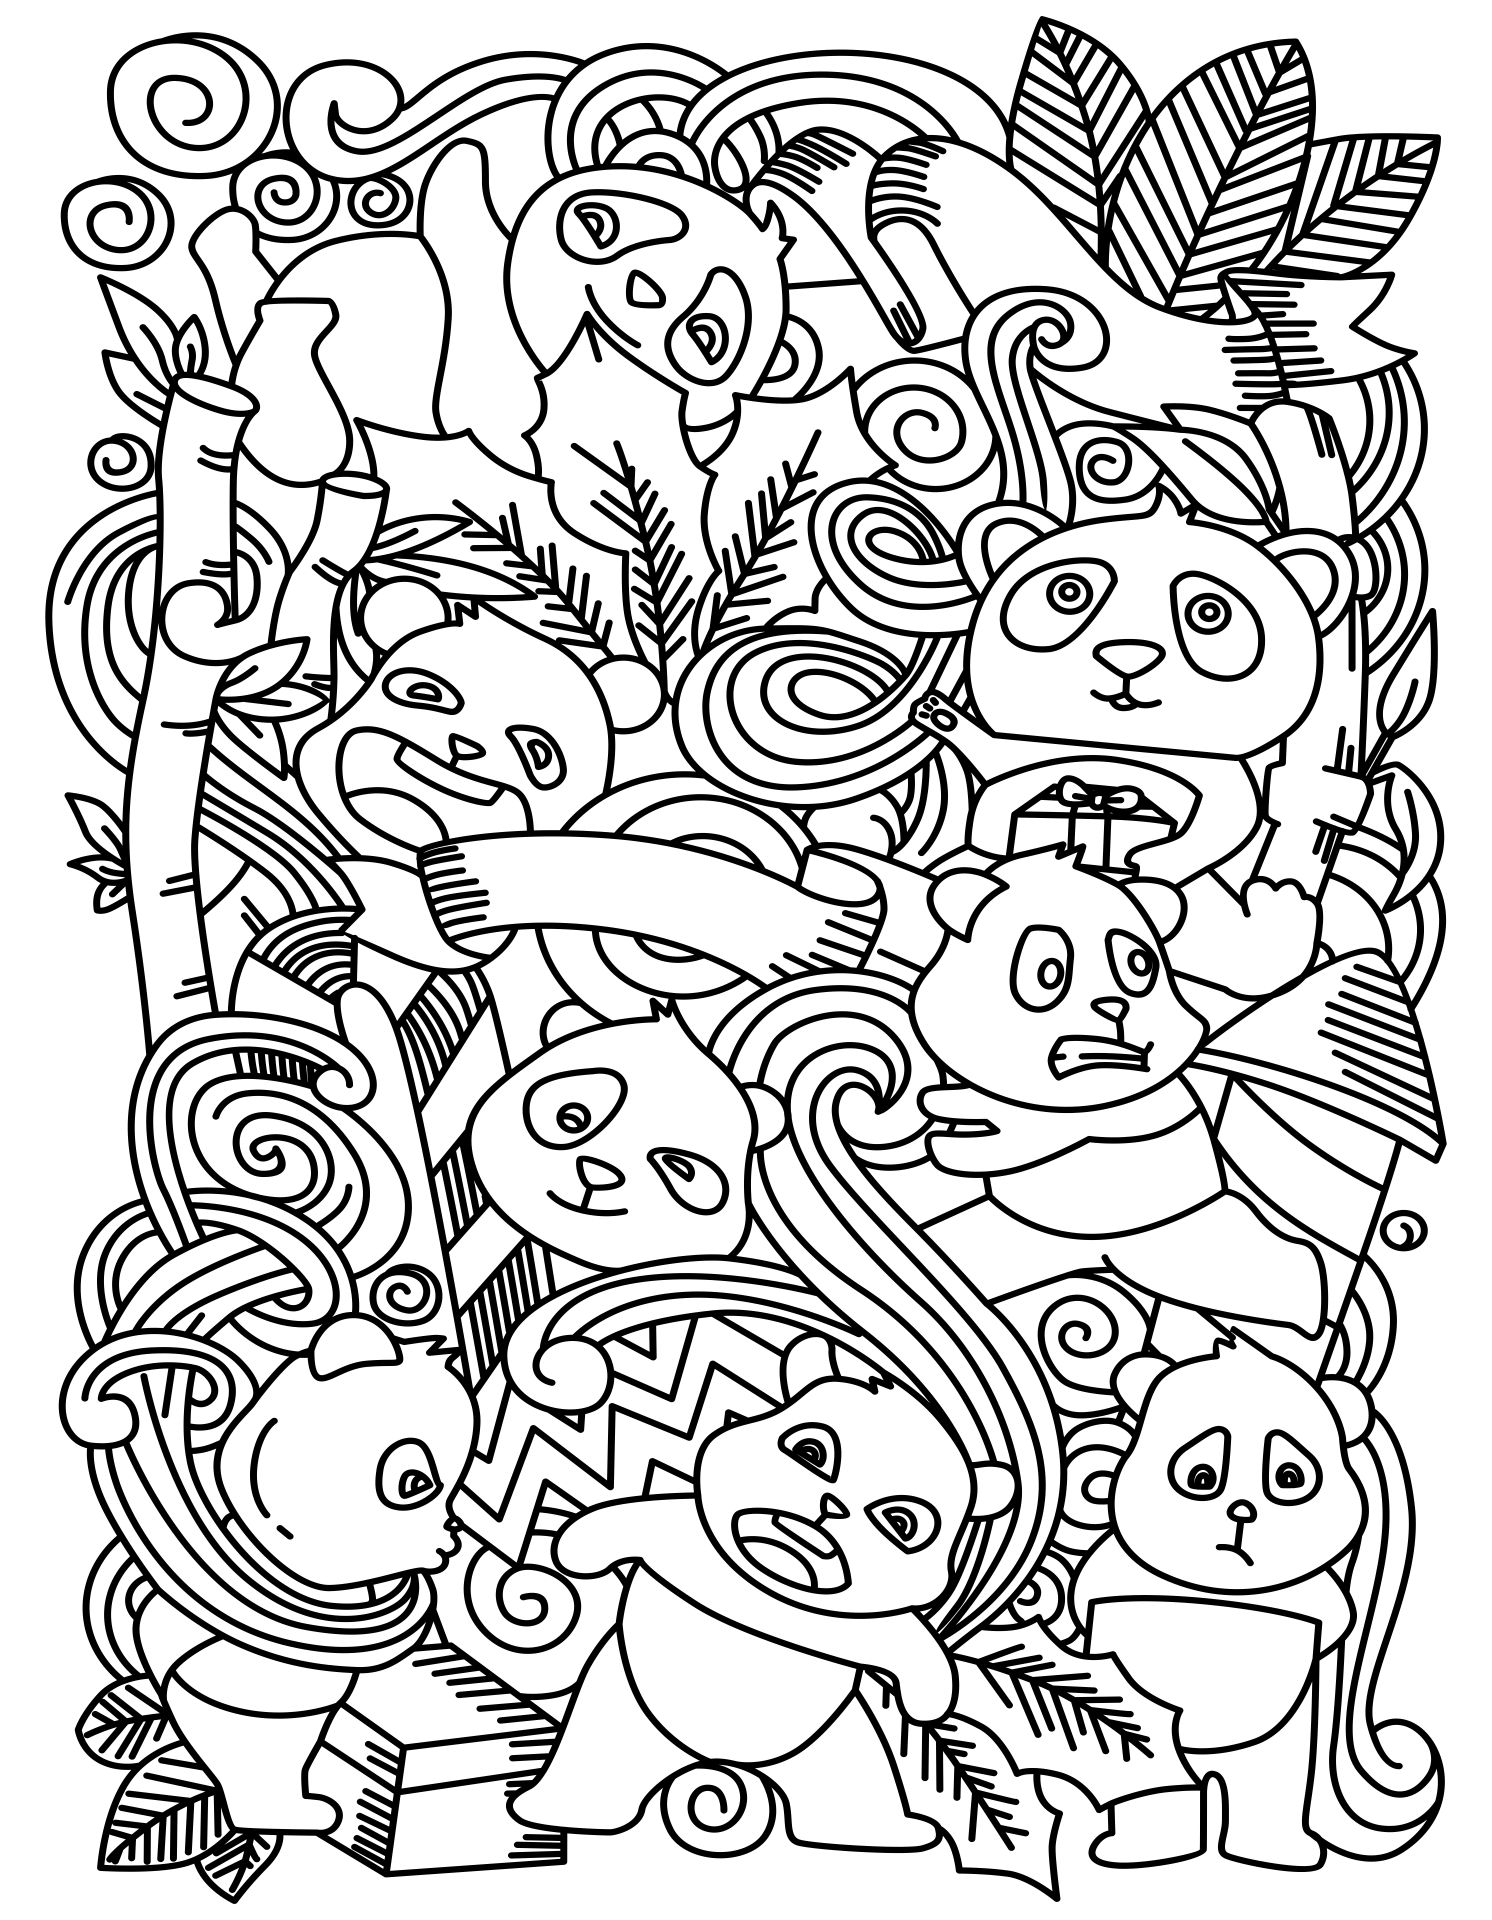 6 Best Images of Difficult Coloring Pages Free Printable - Hard